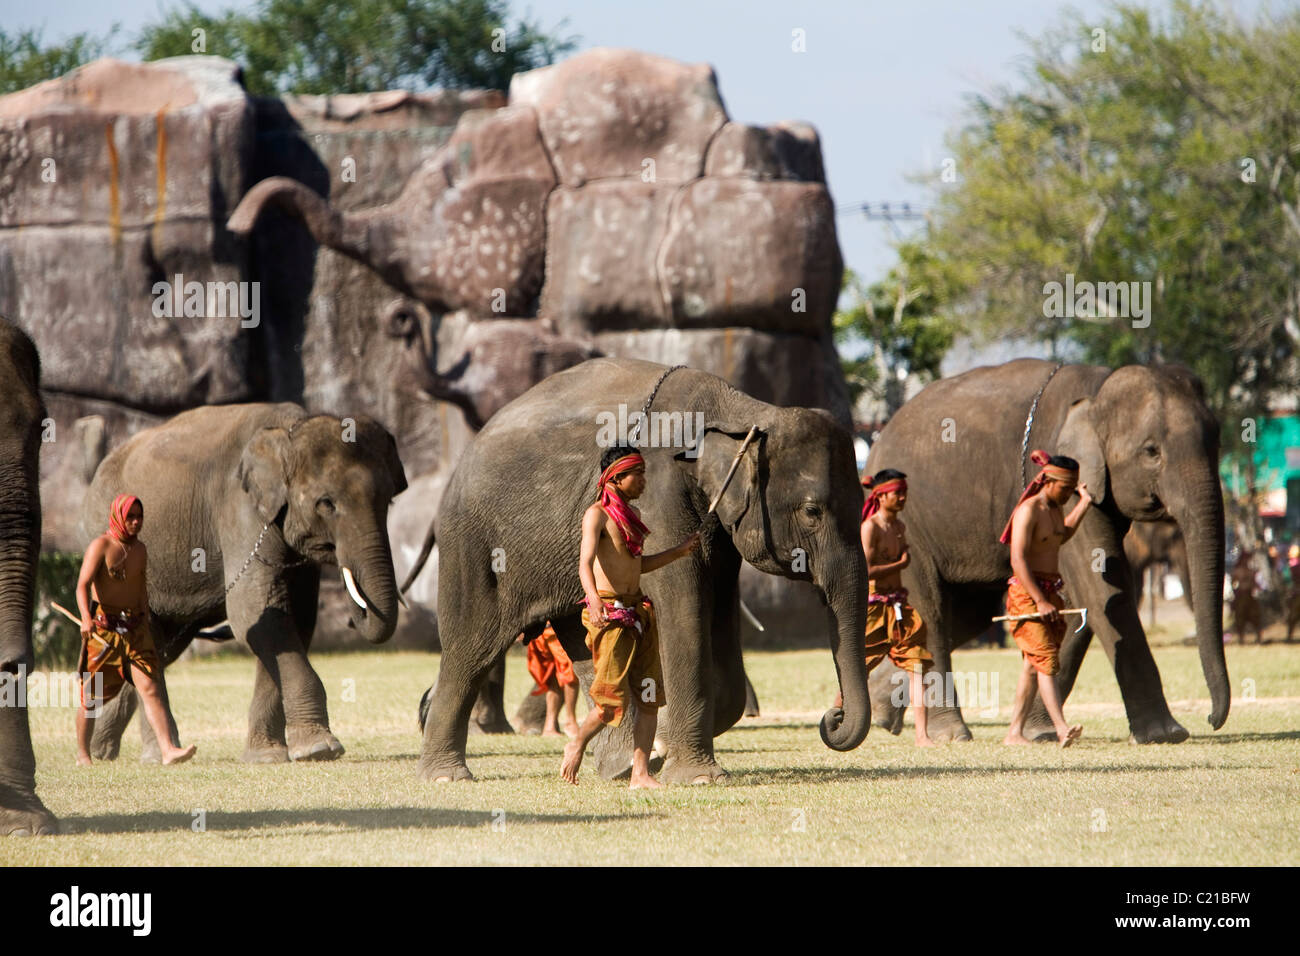 A herd of elephants and their Suai mahouts during Surin Elephant Roundup festival.  Surin, Surin, Thailand Stock Photo